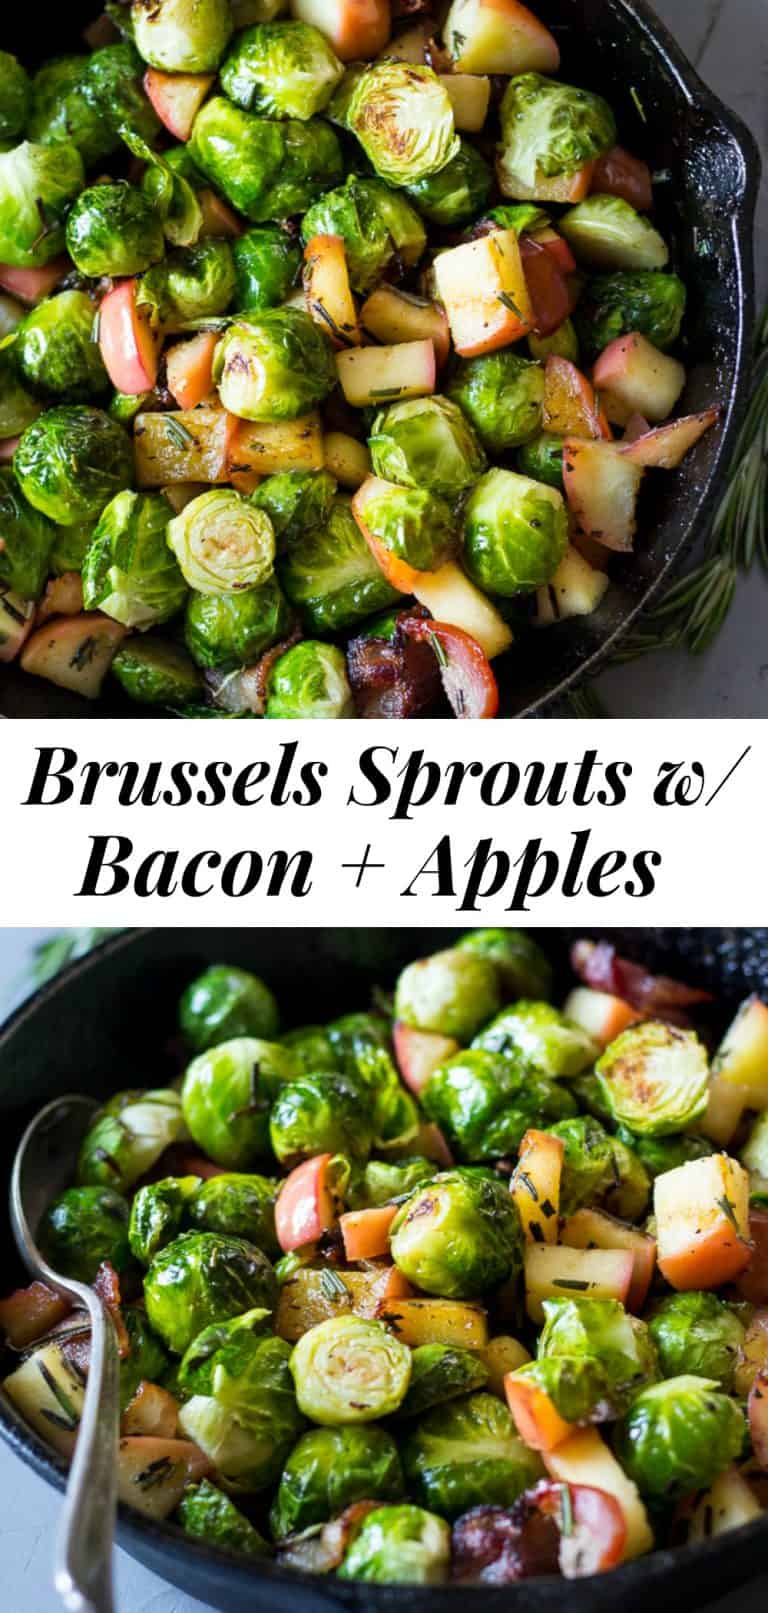 Paleo Roasted Brussels Sprouts with Bacon & Apples {Whole30}